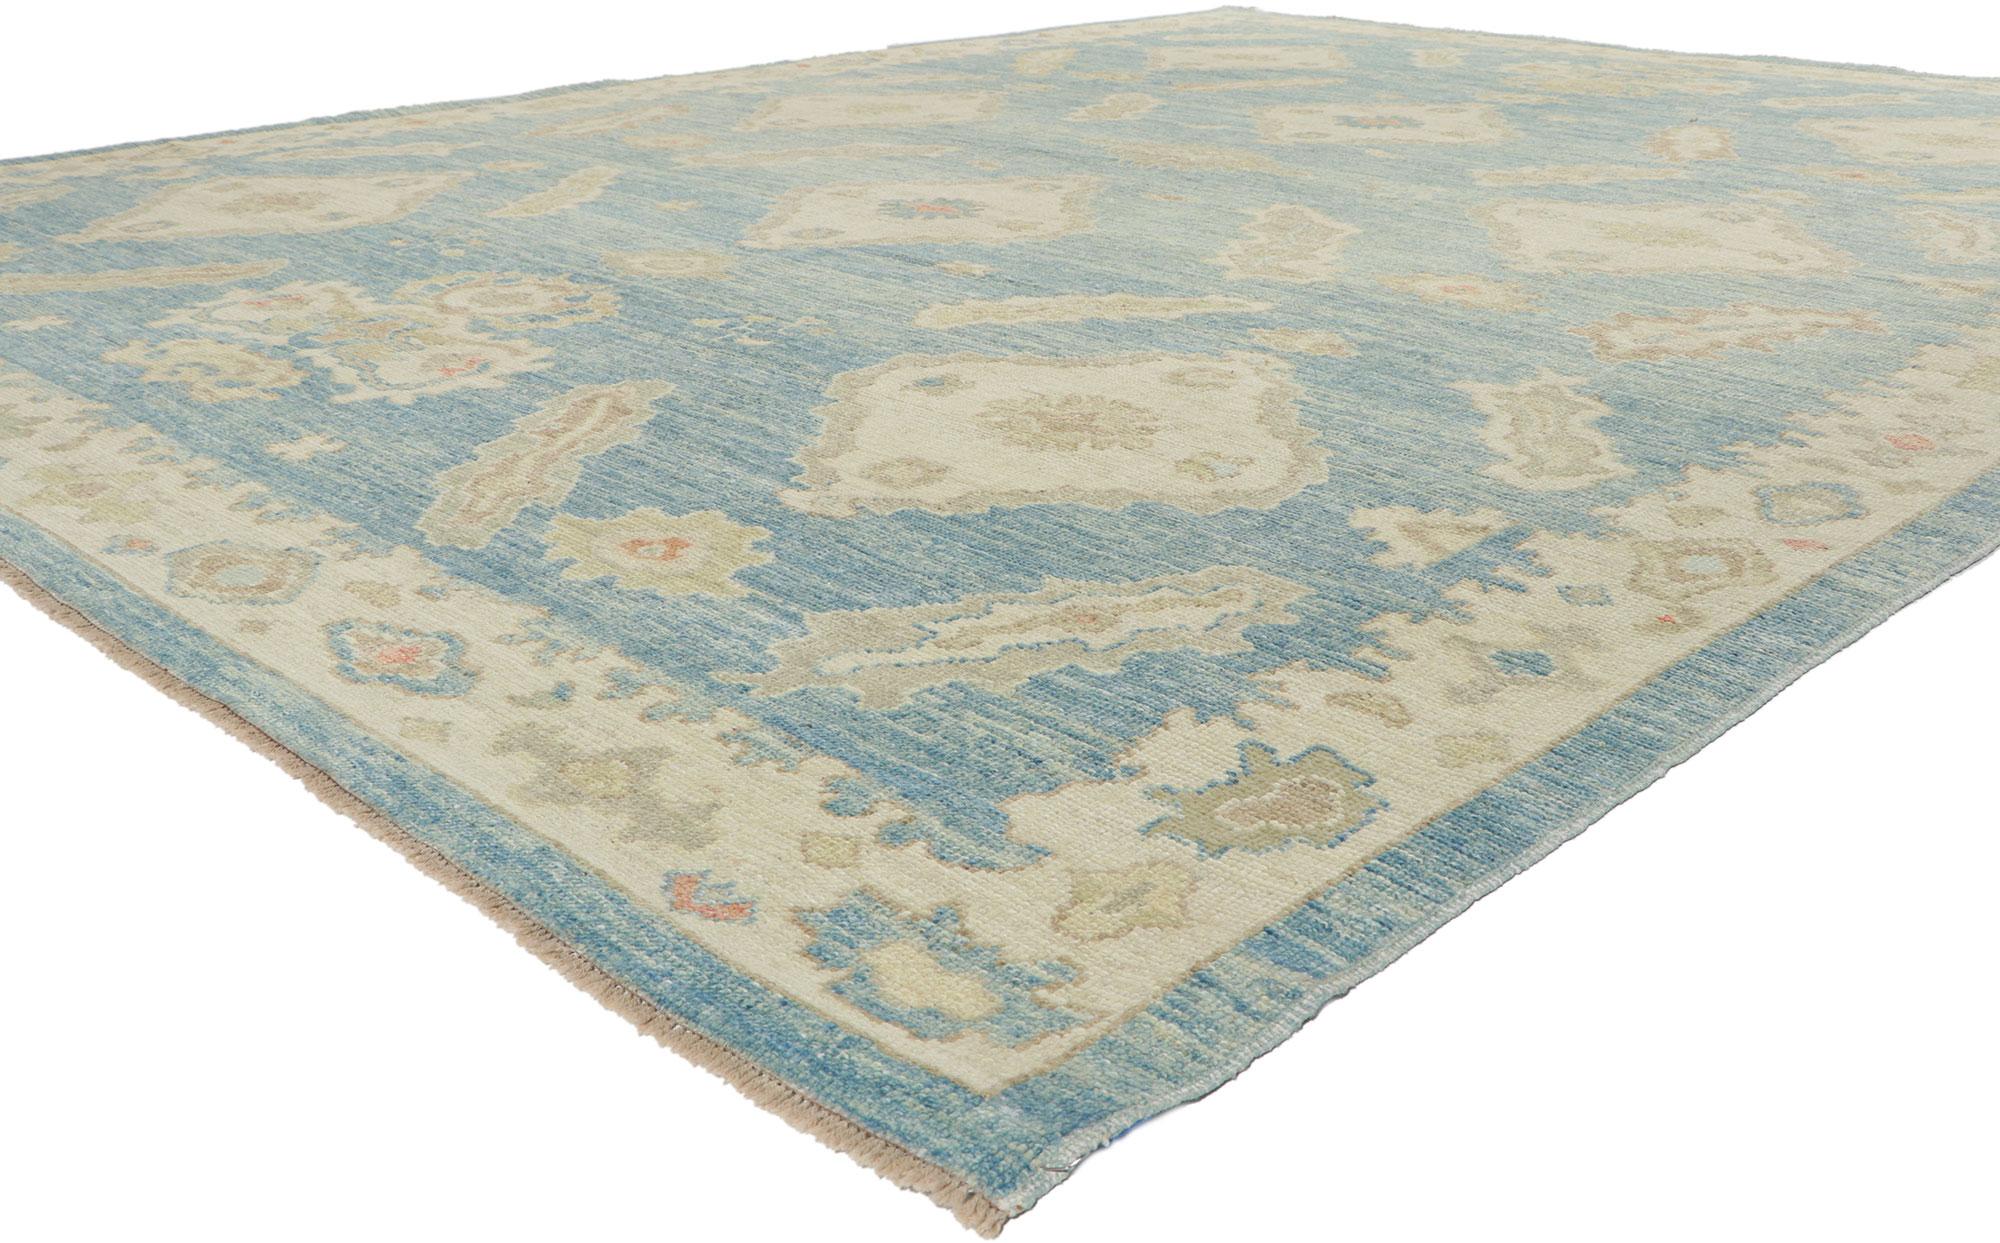 53822 new Contemporary Turkish Oushak rug, 10'04 x 13'06. Seasonally charming yet perennially fresh, this hand-knotted wool contemporary Turkish Oushak rug is poised to impress. Perfect for a living room, front room, dining room, wine cellar,